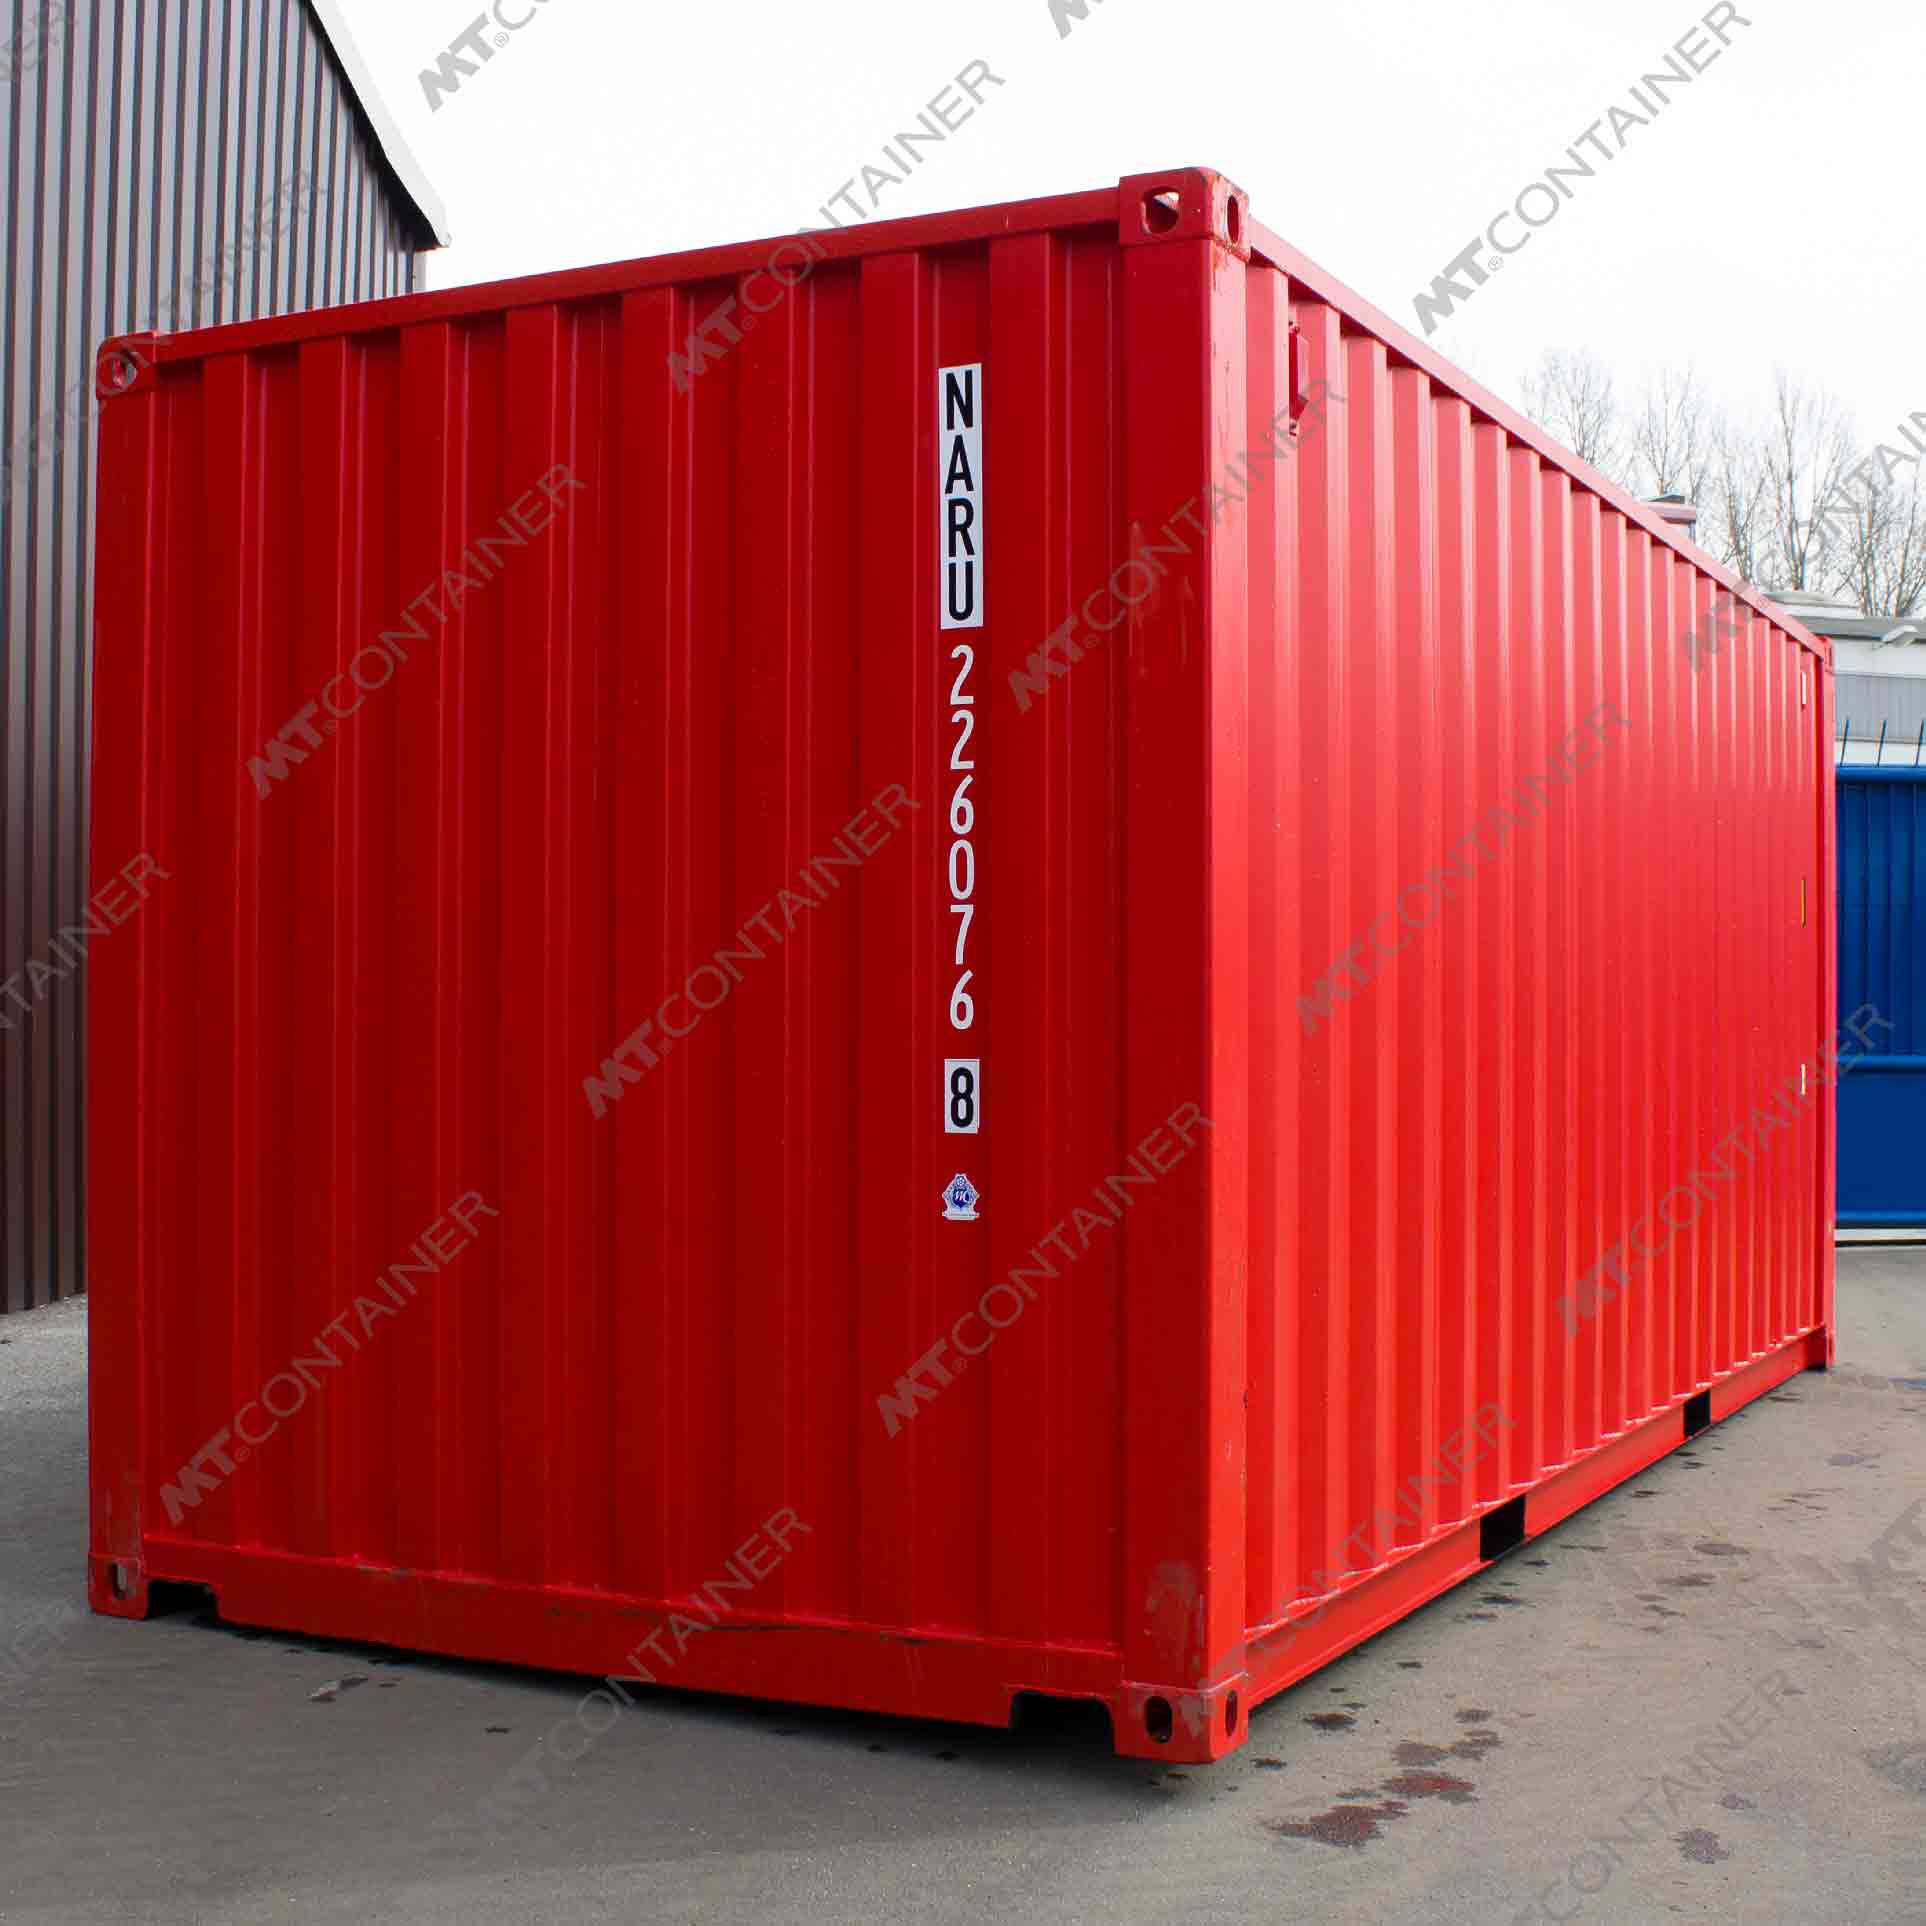 Ein roter 20 Fuss Seecontainer.